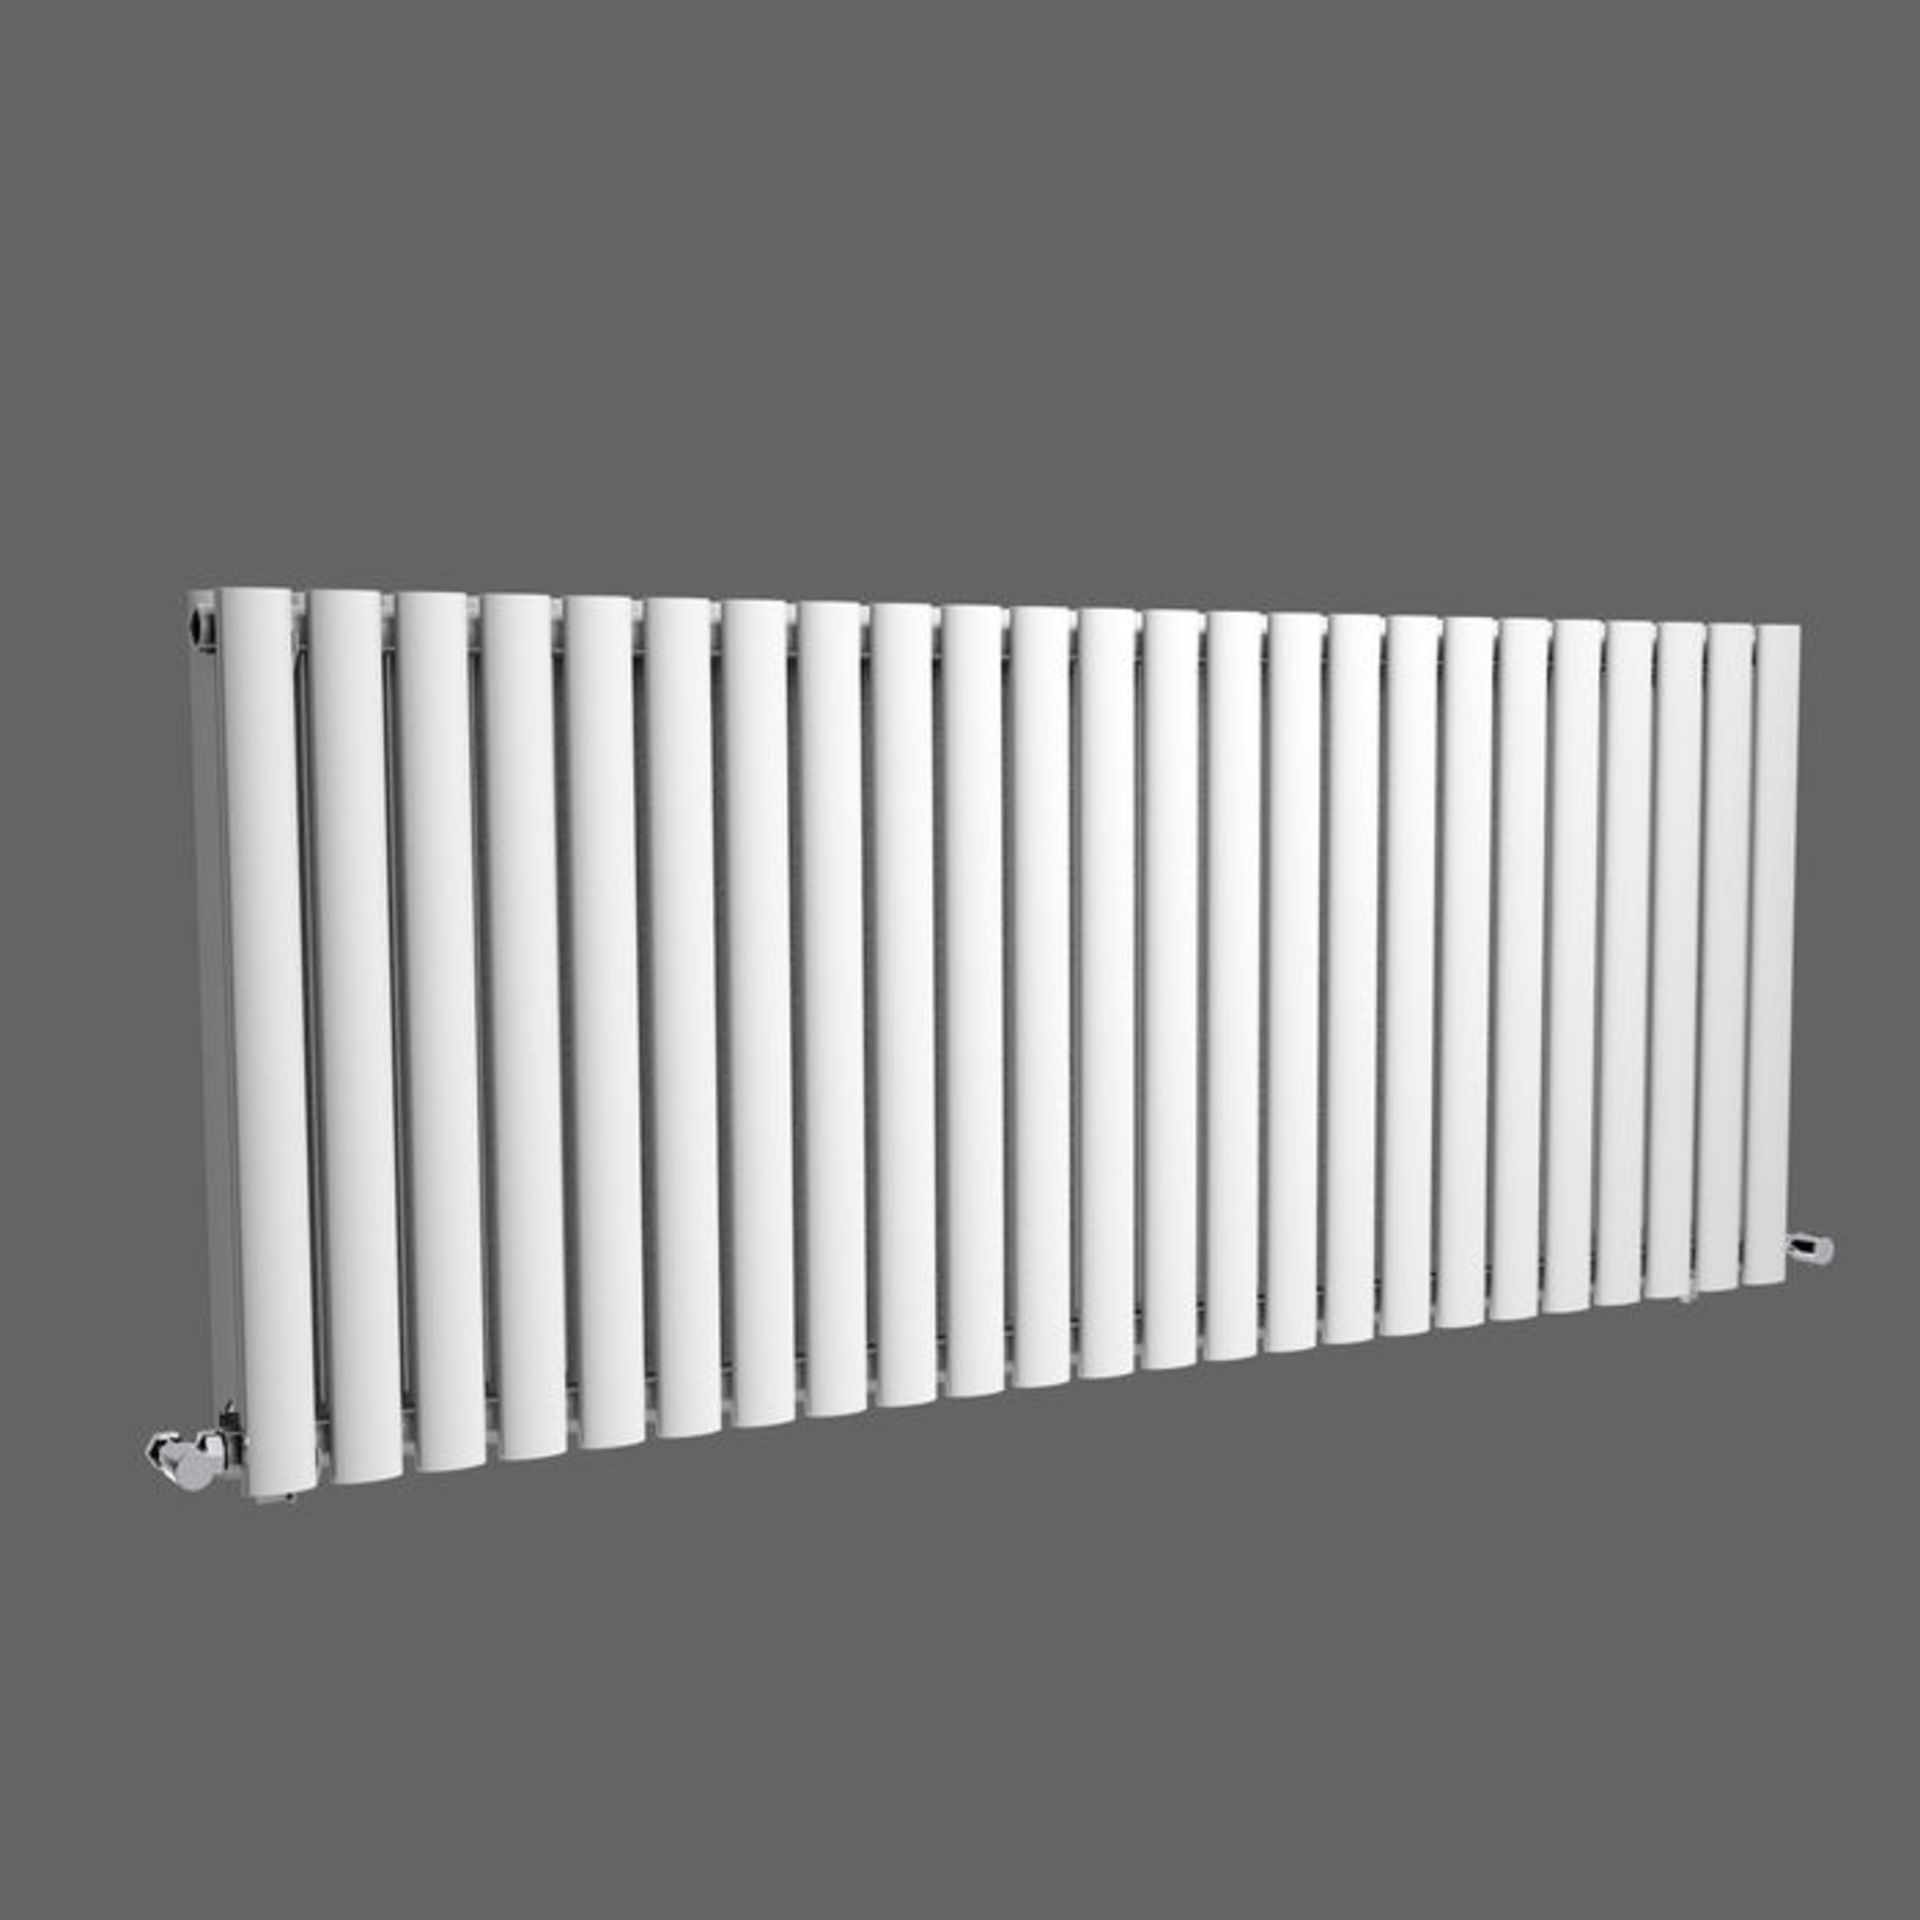 (PO172) 600x1440mm Gloss White Double Panel Oval Tube Horizontal Radiator. RRP £474.99.Made from - Image 3 of 3